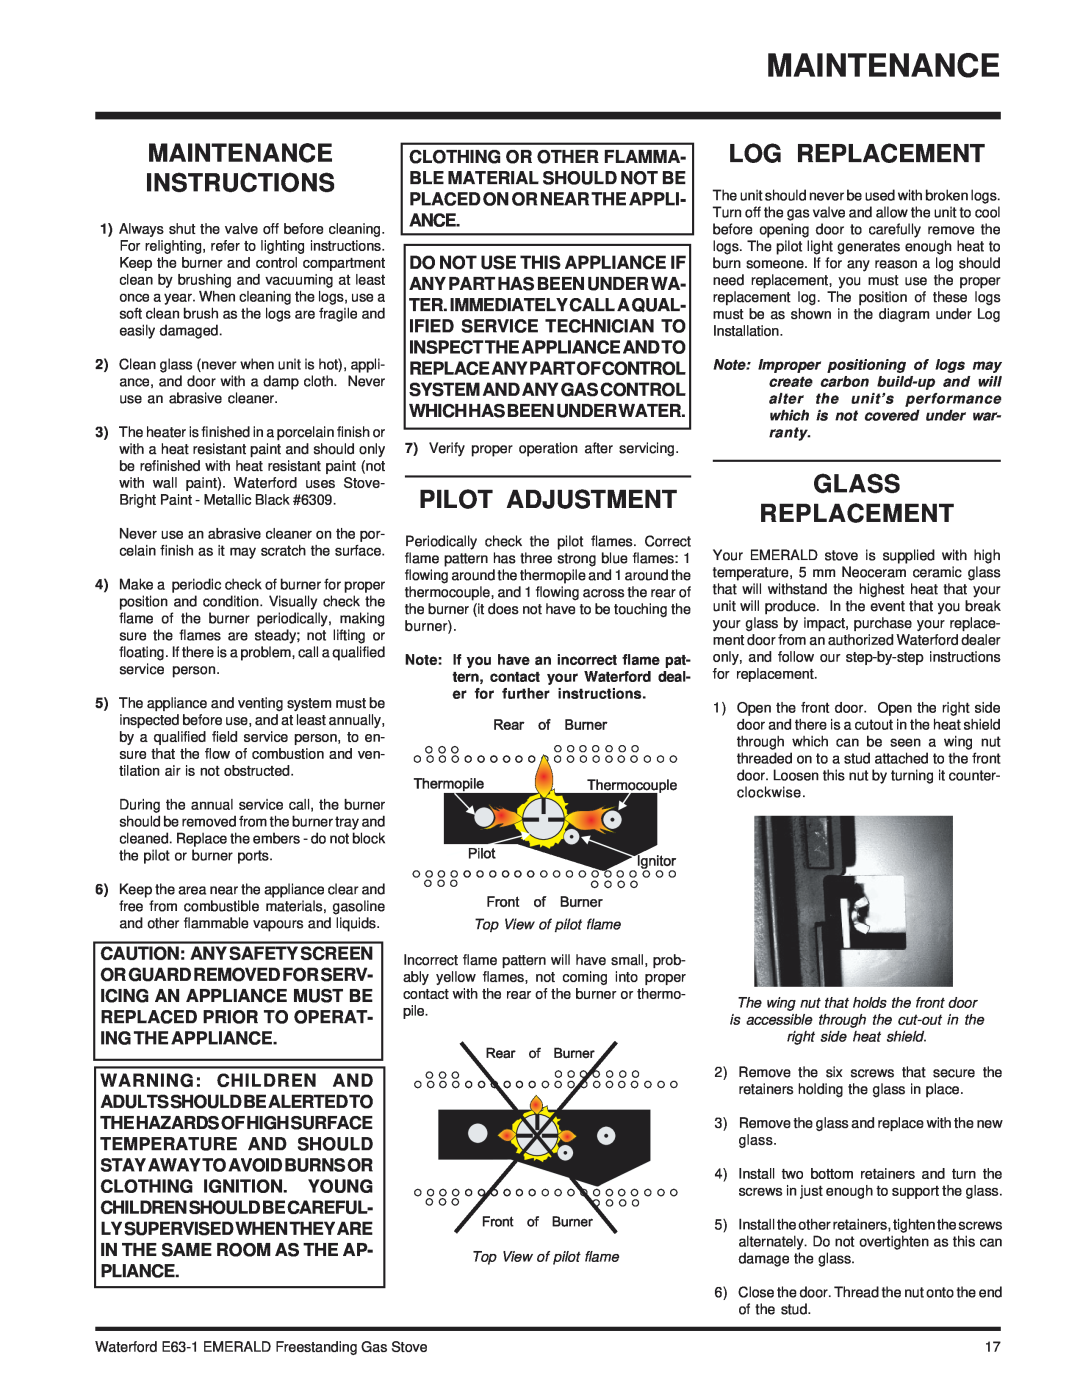 Waterford Appliances E63-NG1 Maintenance Instructions, Pilot Adjustment, Log Replacement, Glass Replacement 